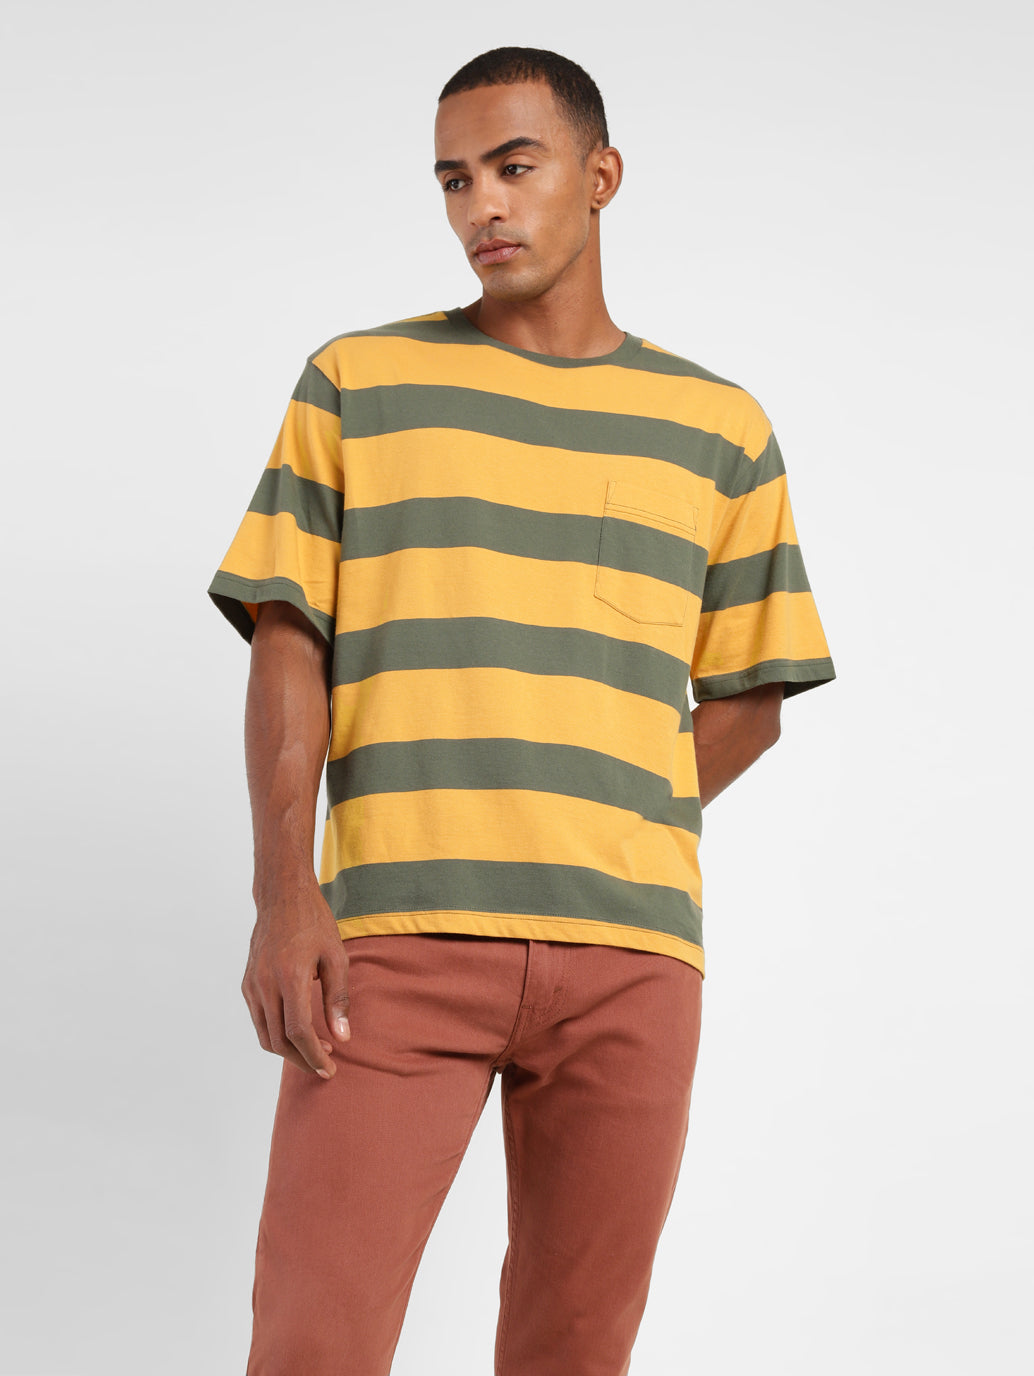 Men's Relaxed Fit T-Shirt